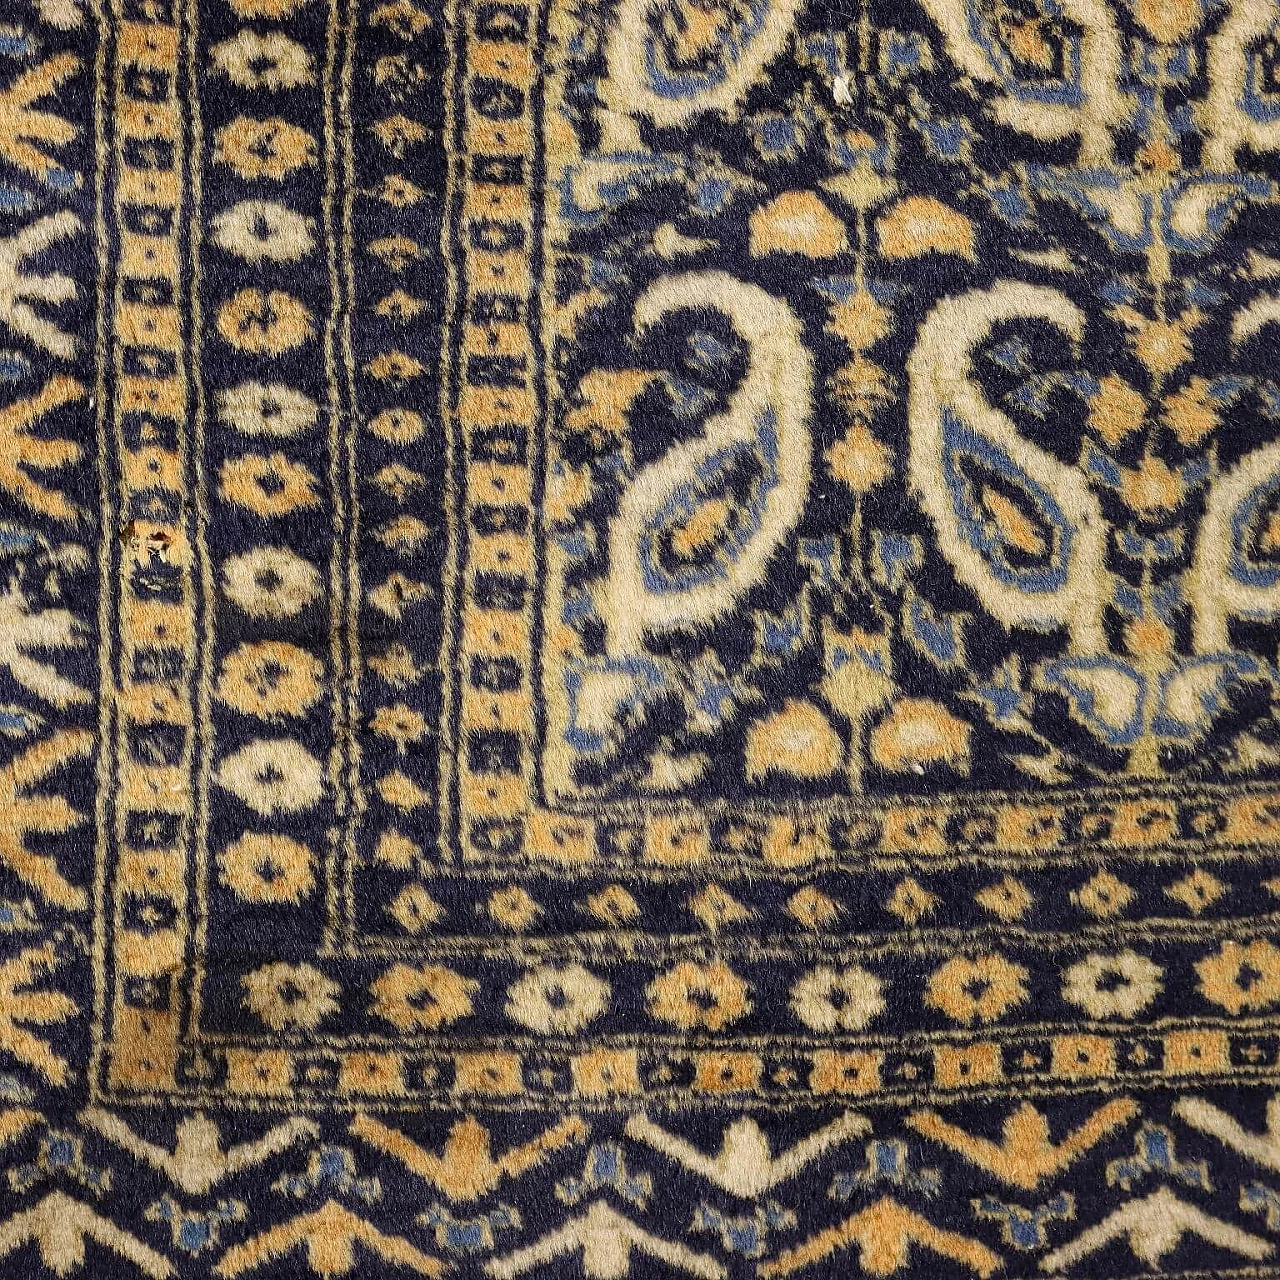 Iranian cotton and wool Ardebil rug 4